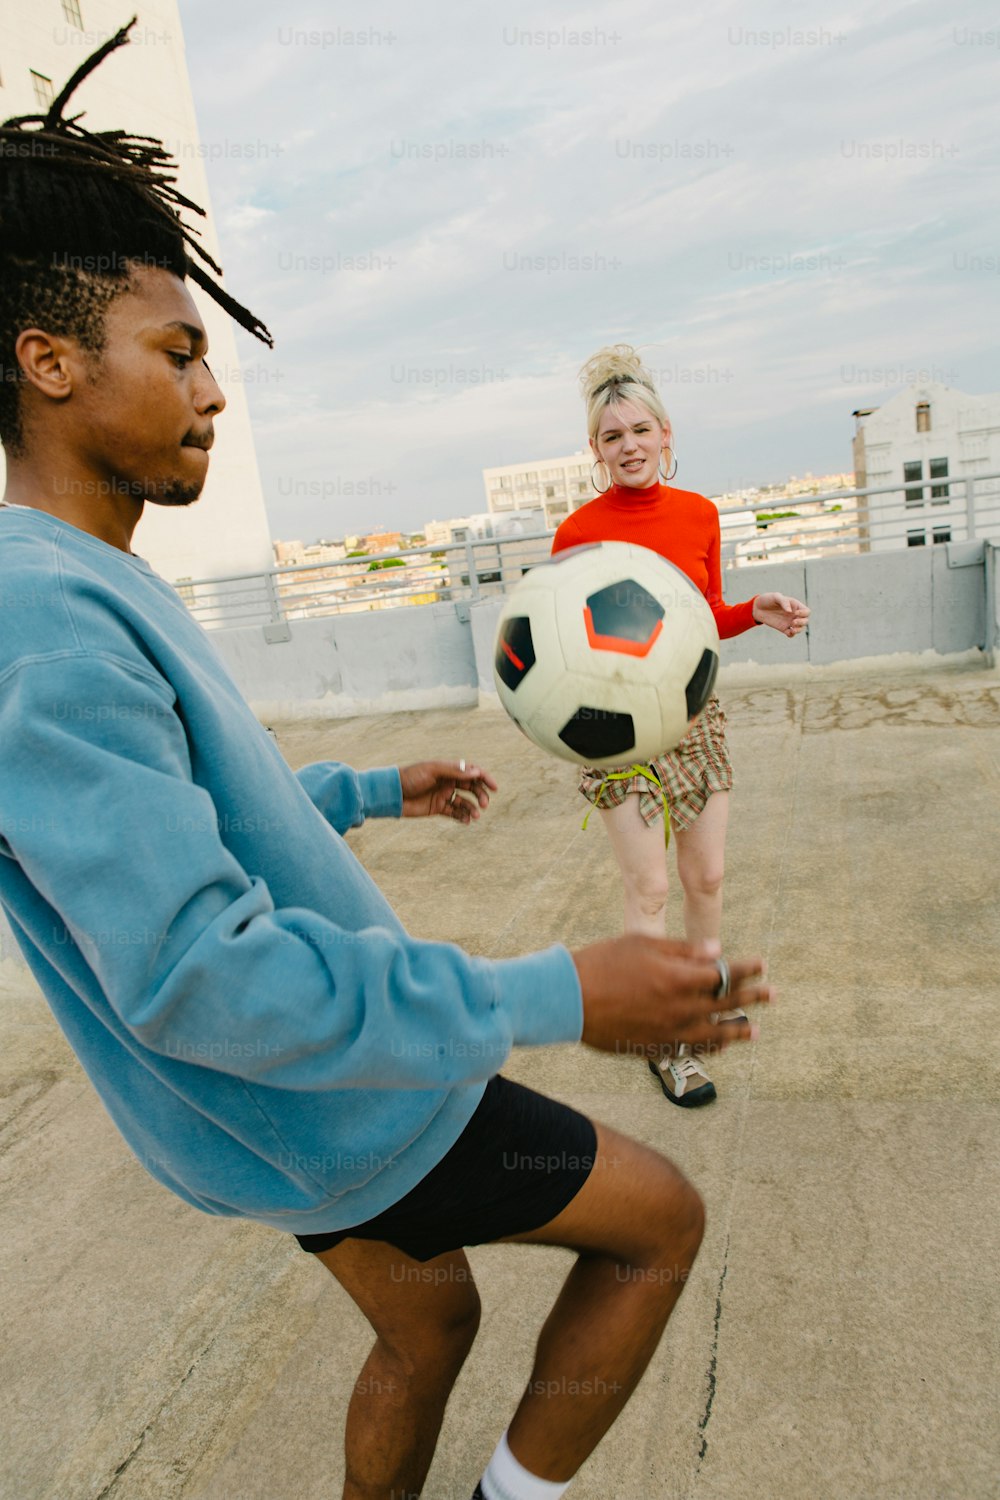 a man with dreadlocks playing with a soccer ball